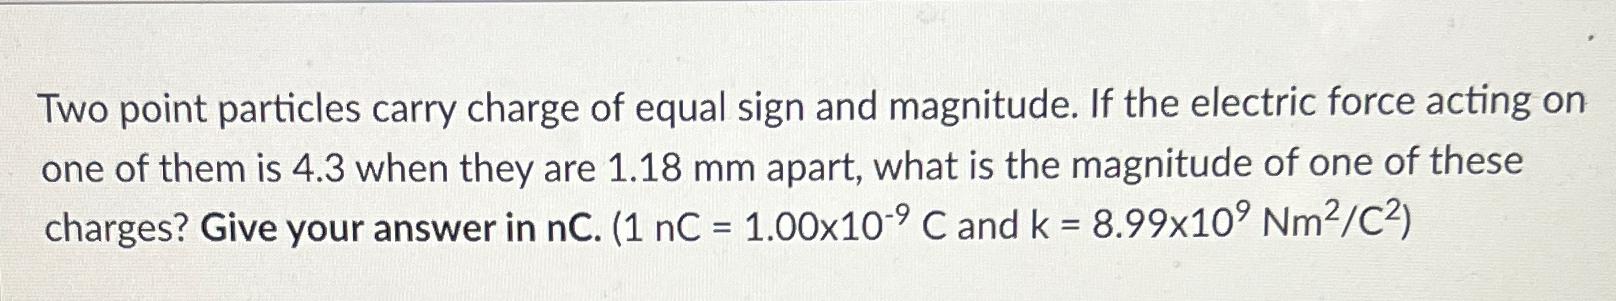 Two point particles carry charge of equal sign and magnitude. If the electric force acting on one of them is